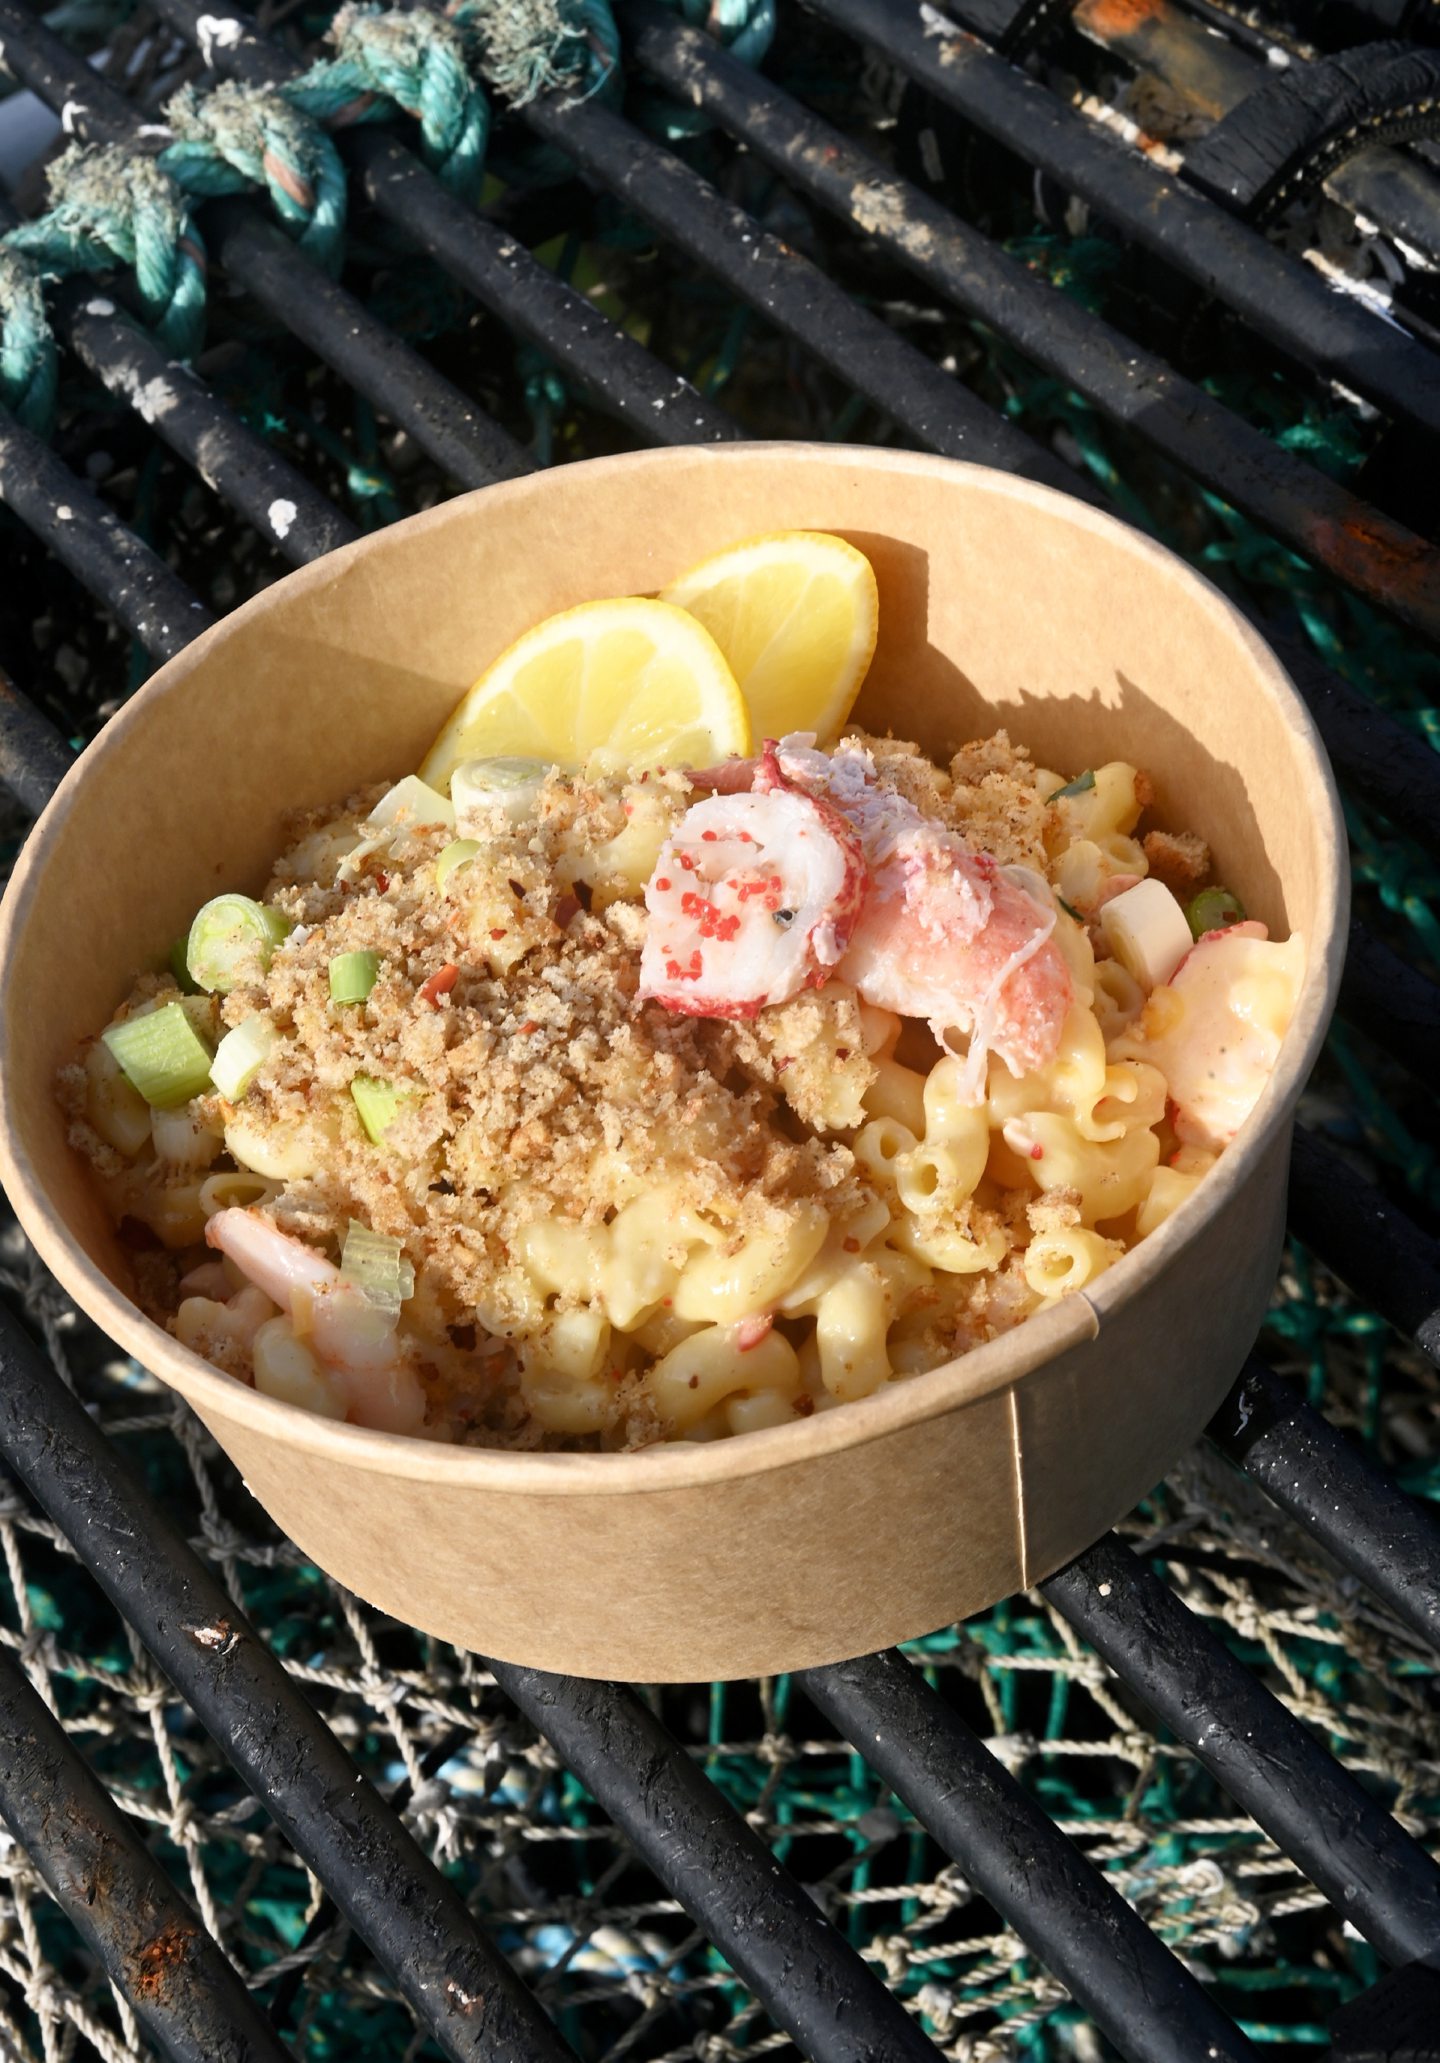 Lobster mac 'n' cheese from Aberdeenshire street food vendor The Seafood Bothy